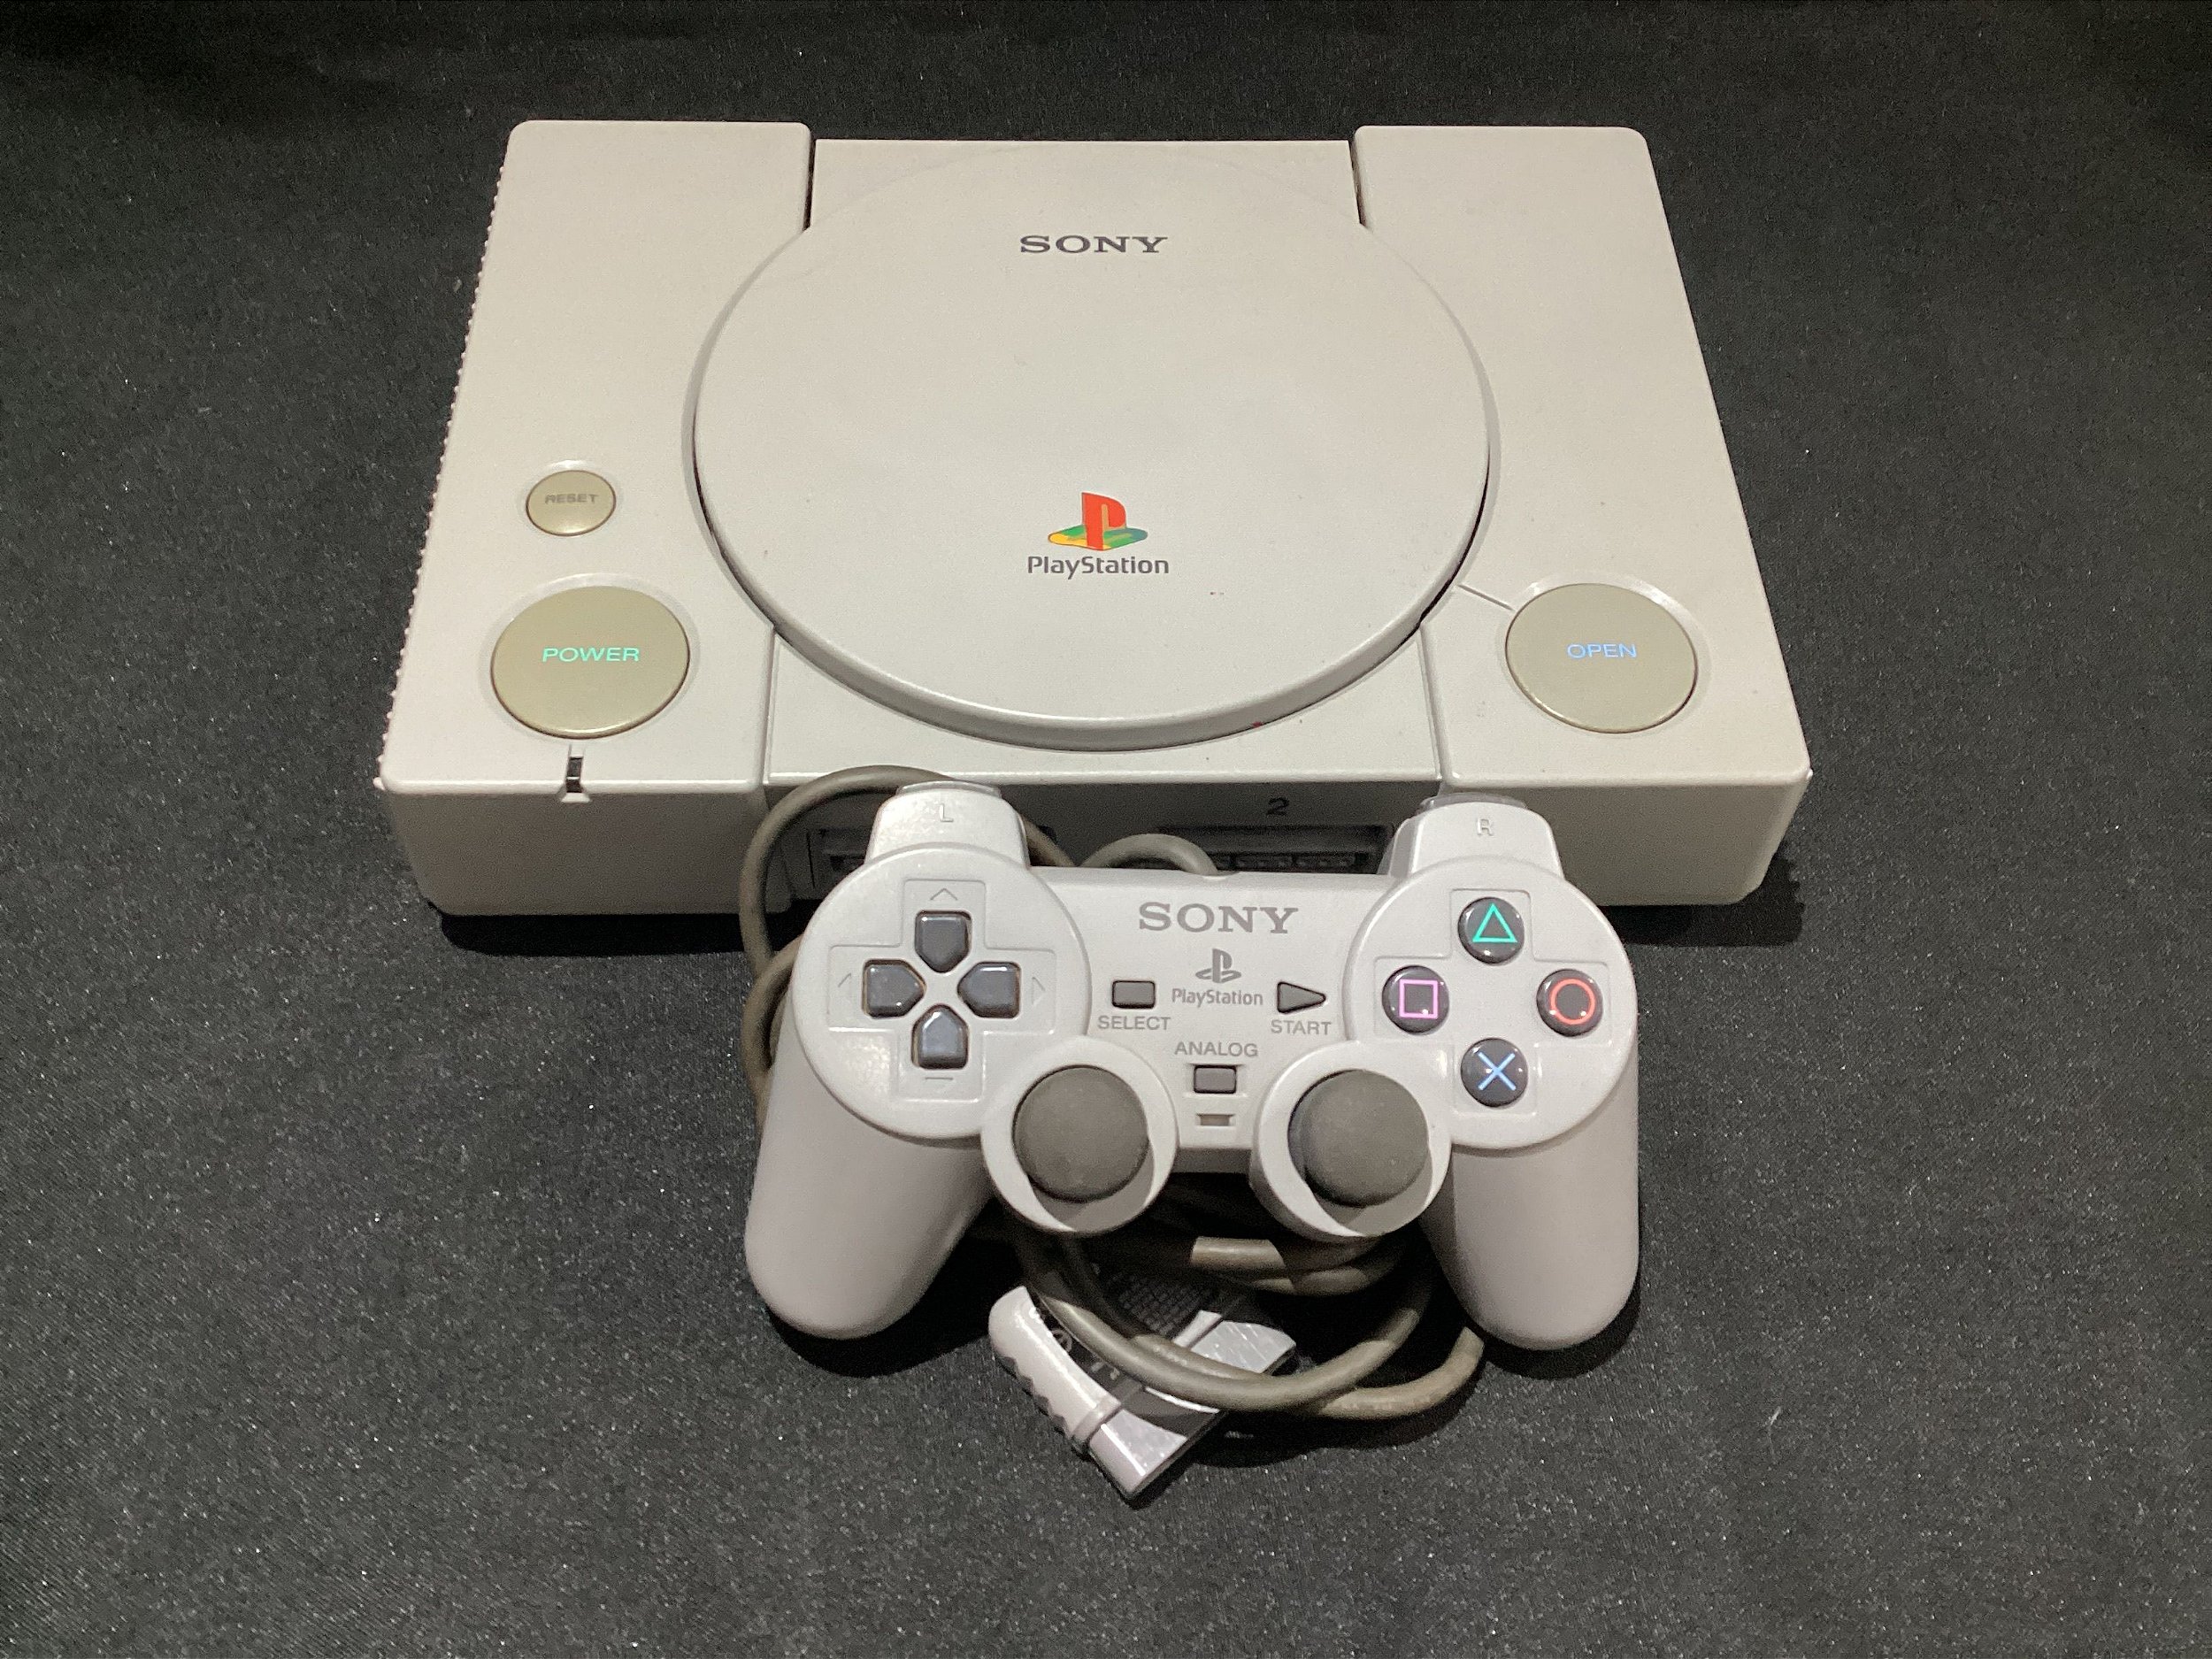 Sony Playstation PS One - Video Game Console (Renewed), playstation 1 